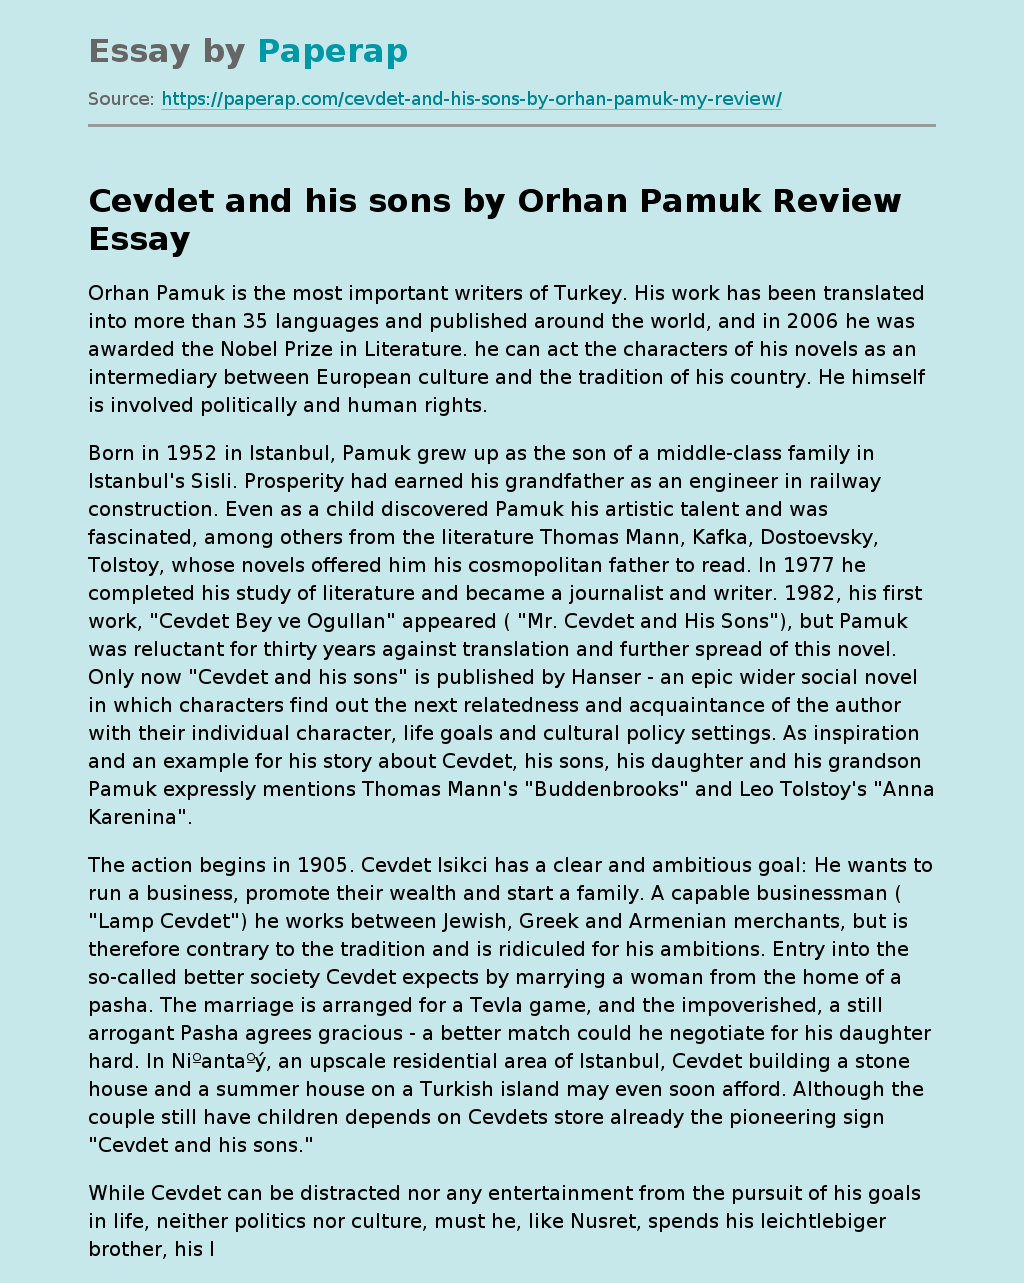 Cevdet and his sons by Orhan Pamuk Review